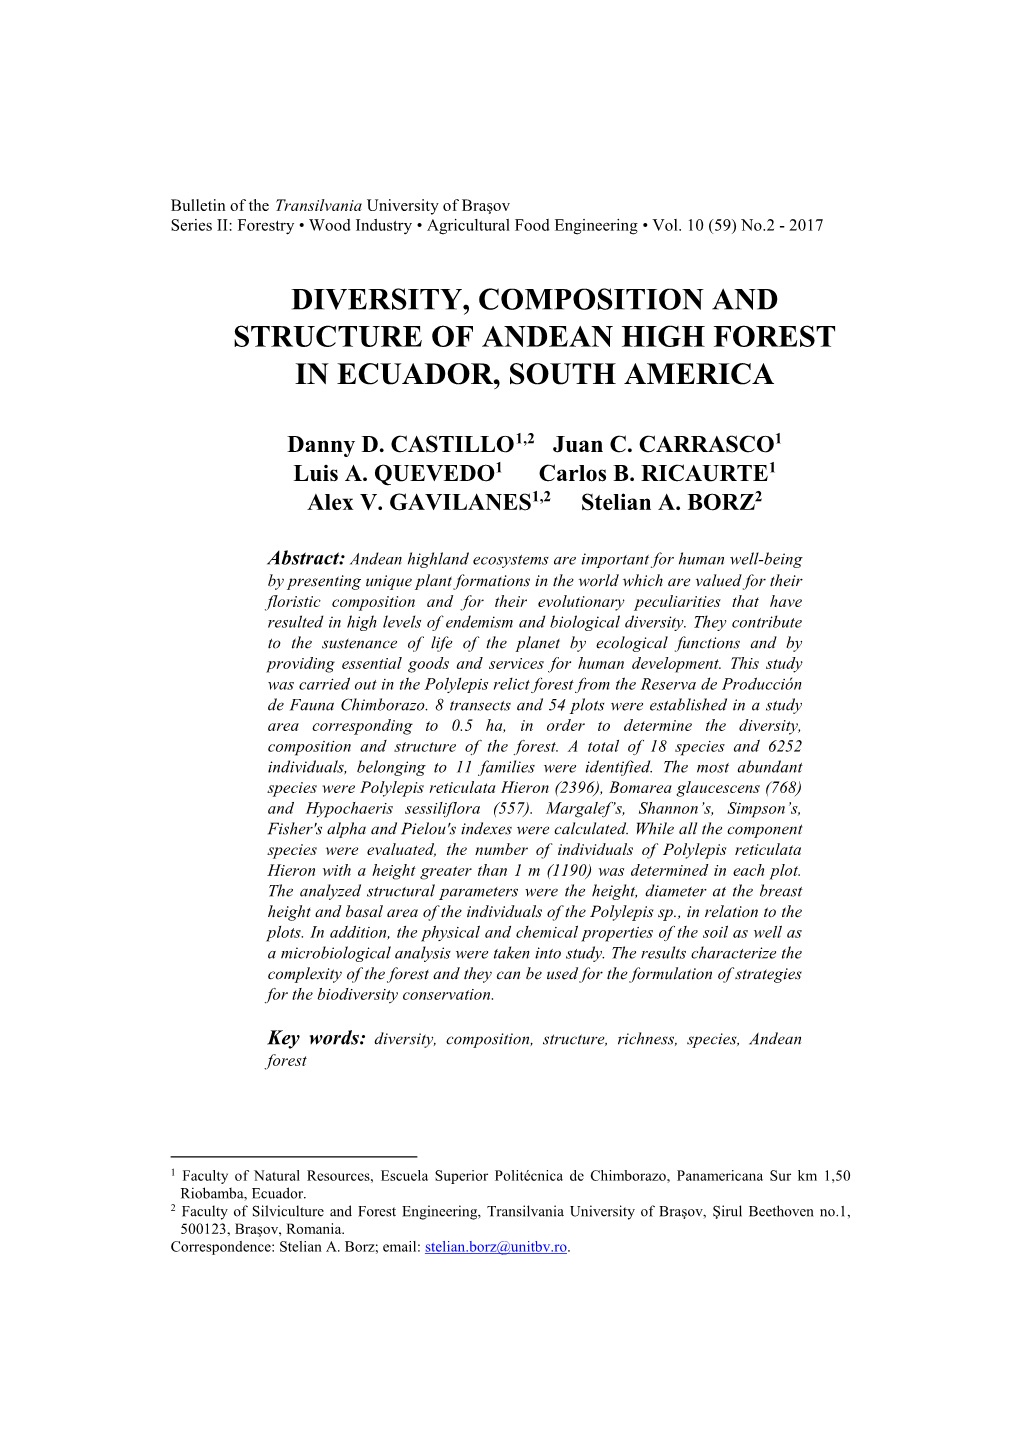 Diversity, Composition and Structure of Andean High Forest in Ecuador, South America